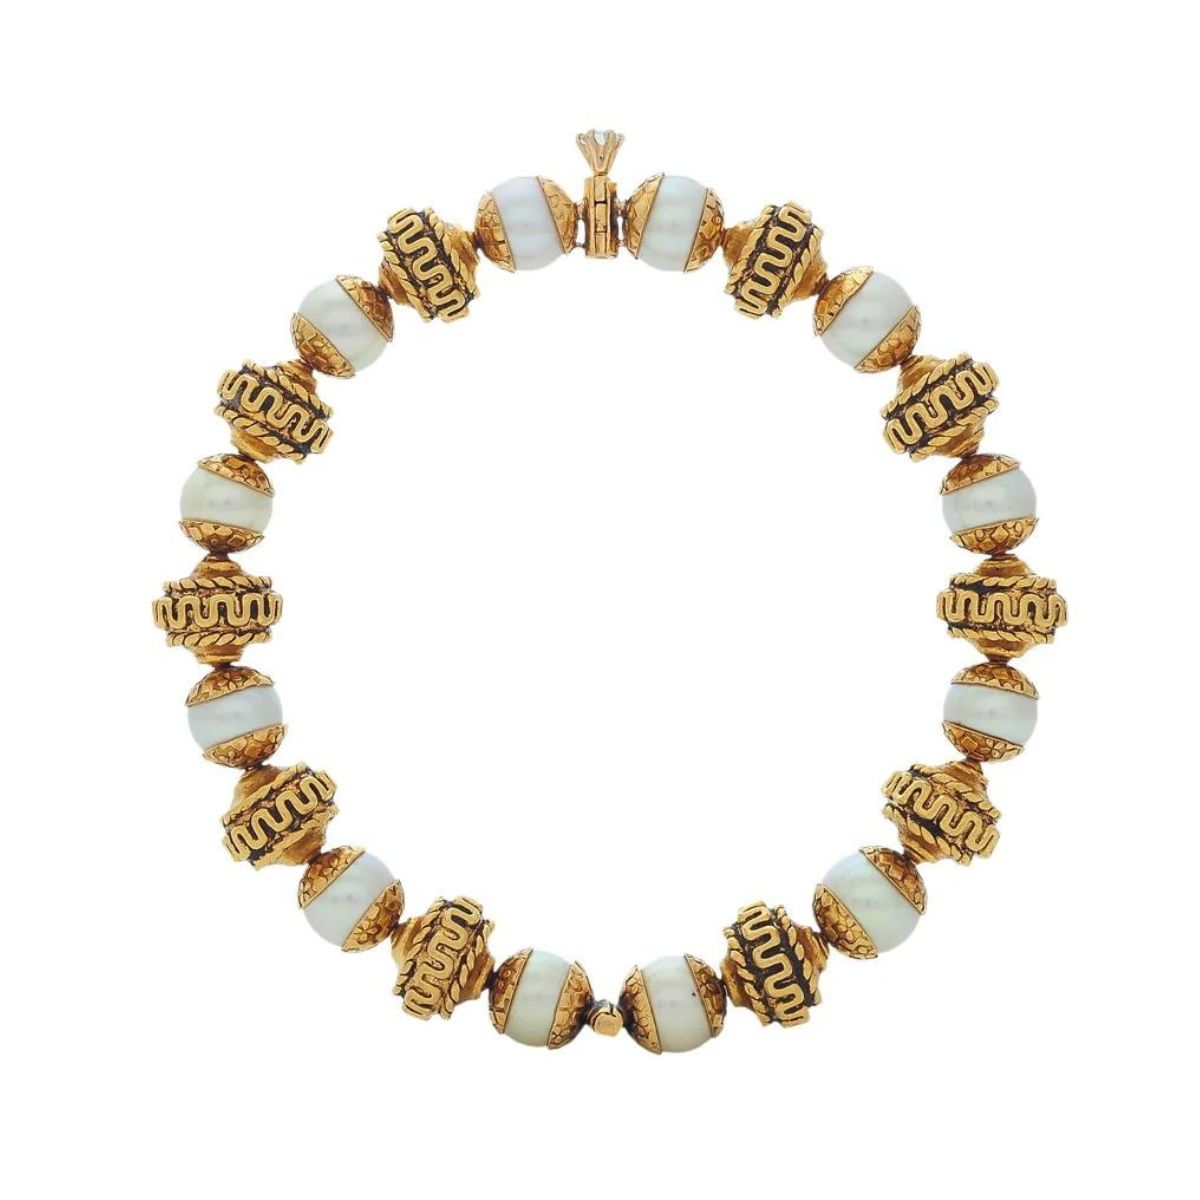 Template Gold Bracelet with South Sea Pearls.